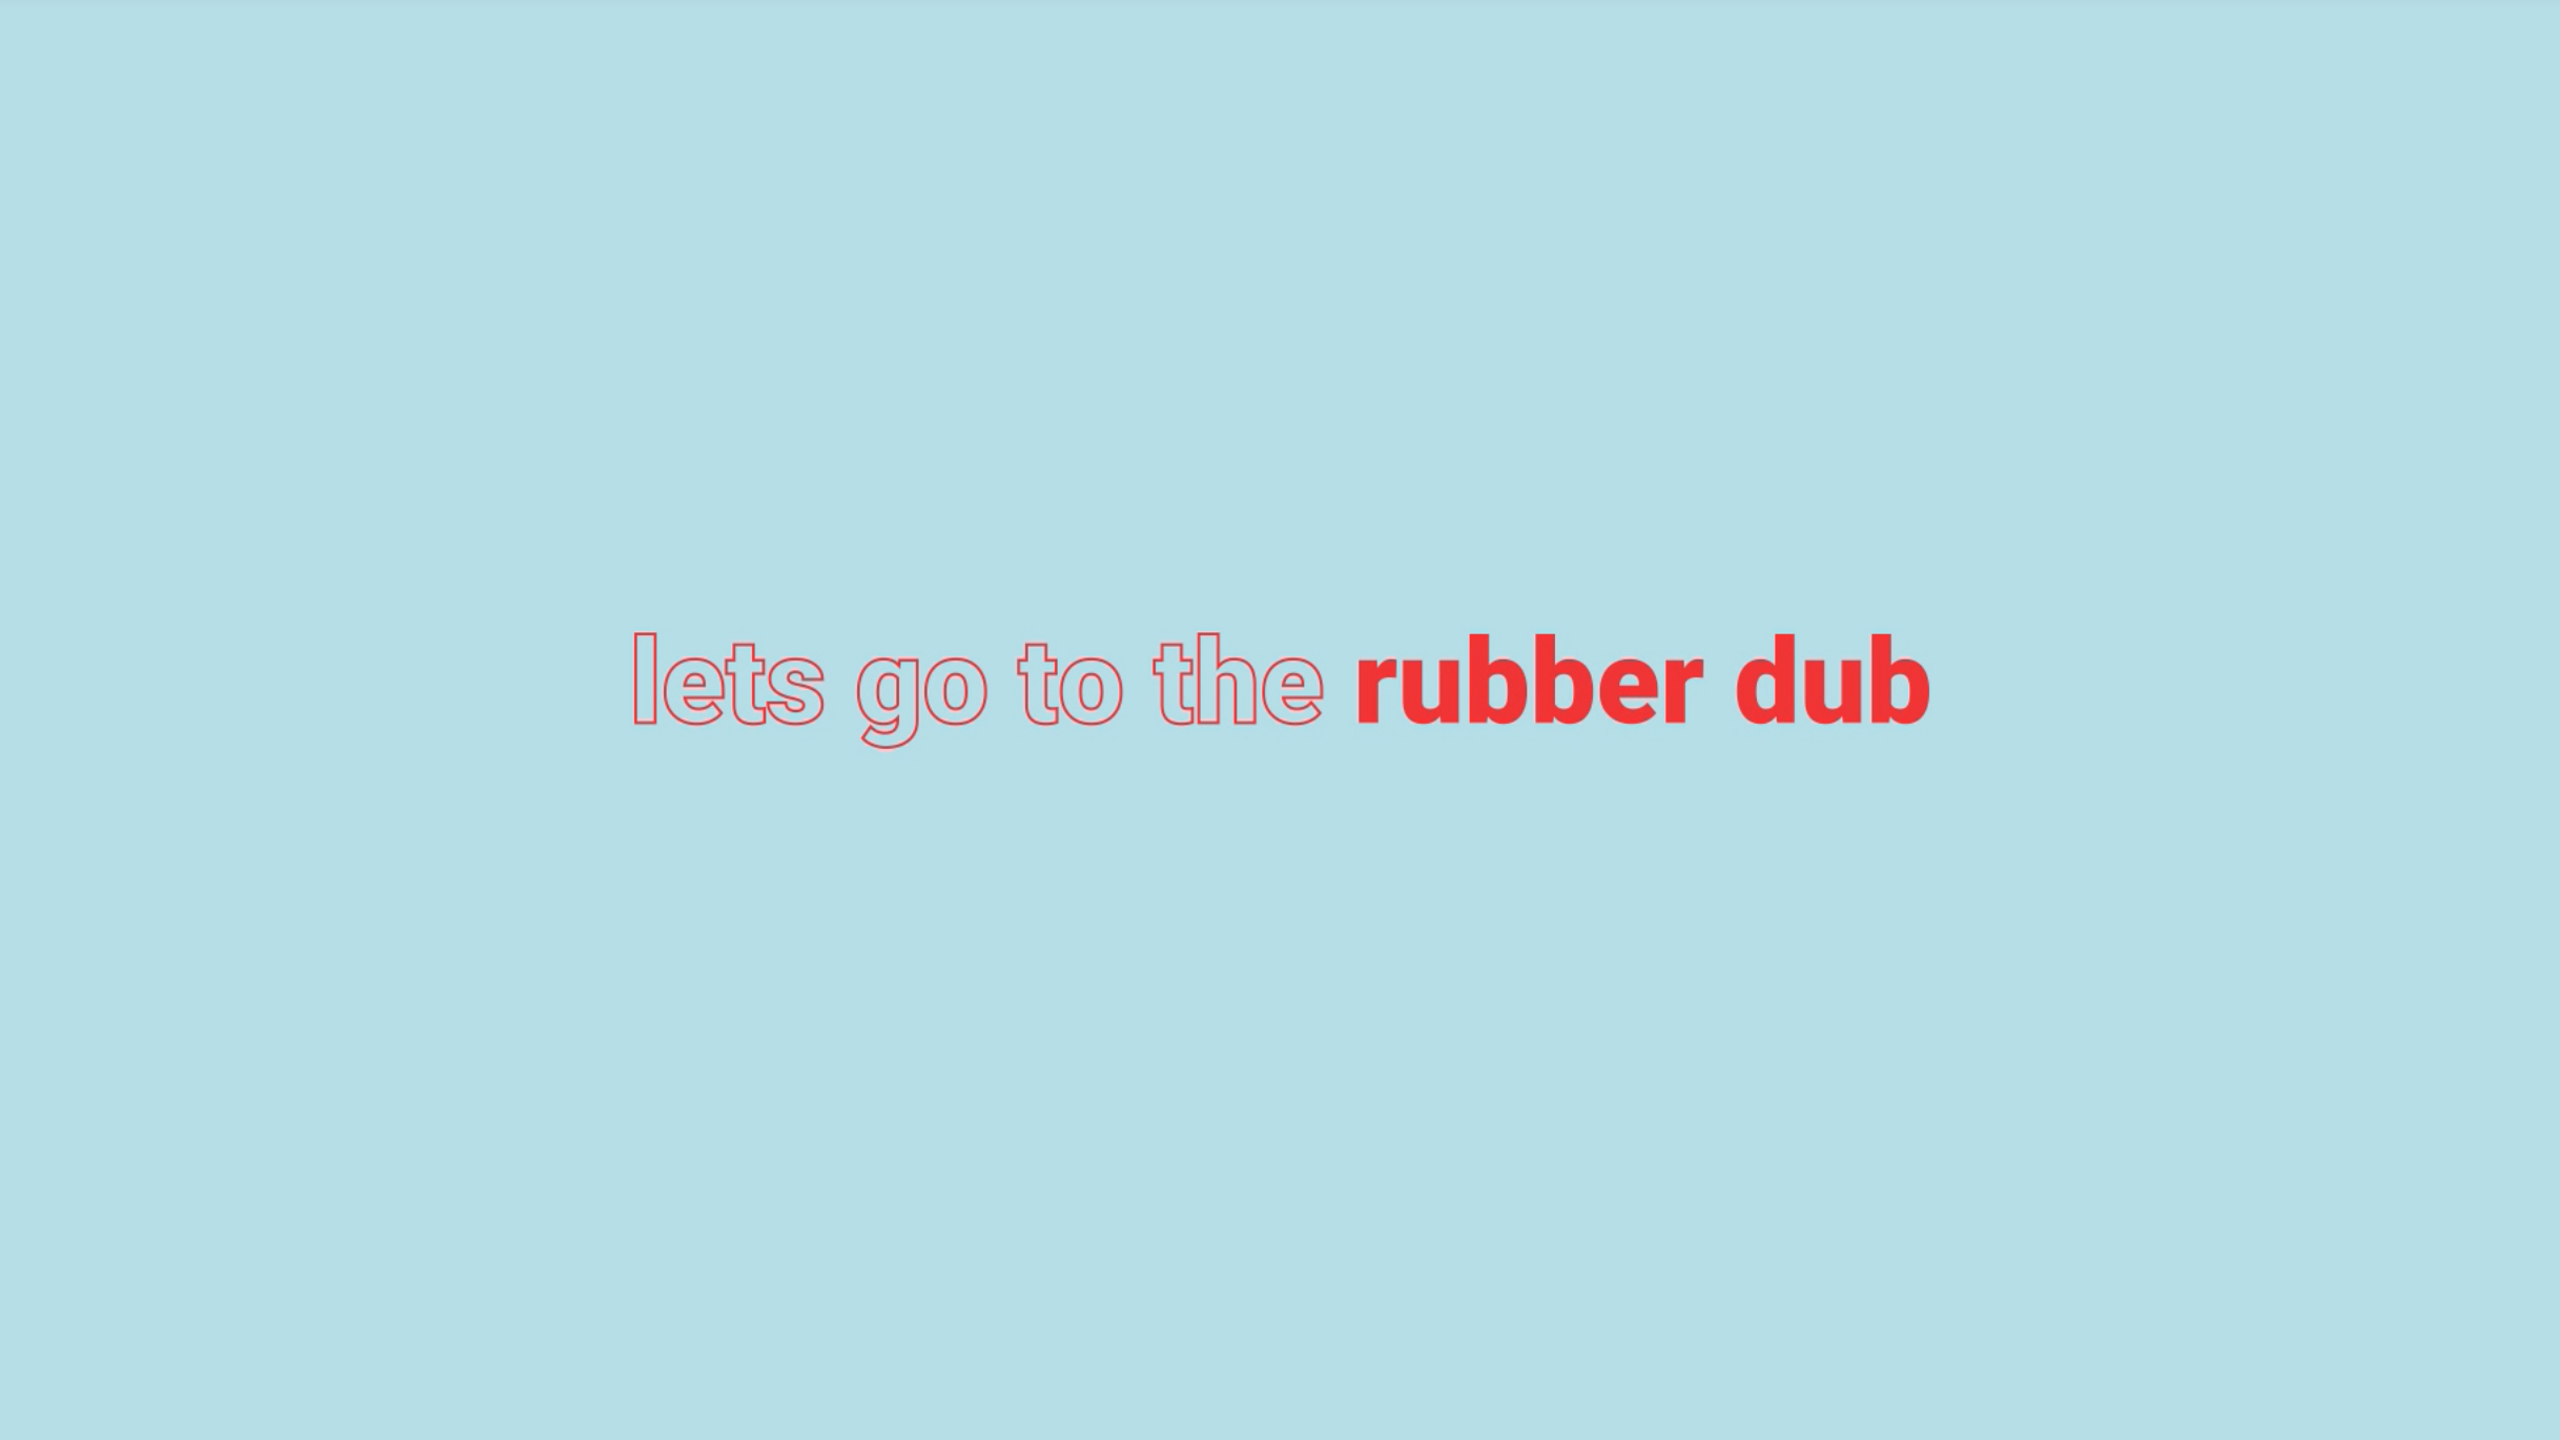 Lets go to the rubber dub - narrated by Lorraine Wells pearly queen of Tower Hamlets (3)